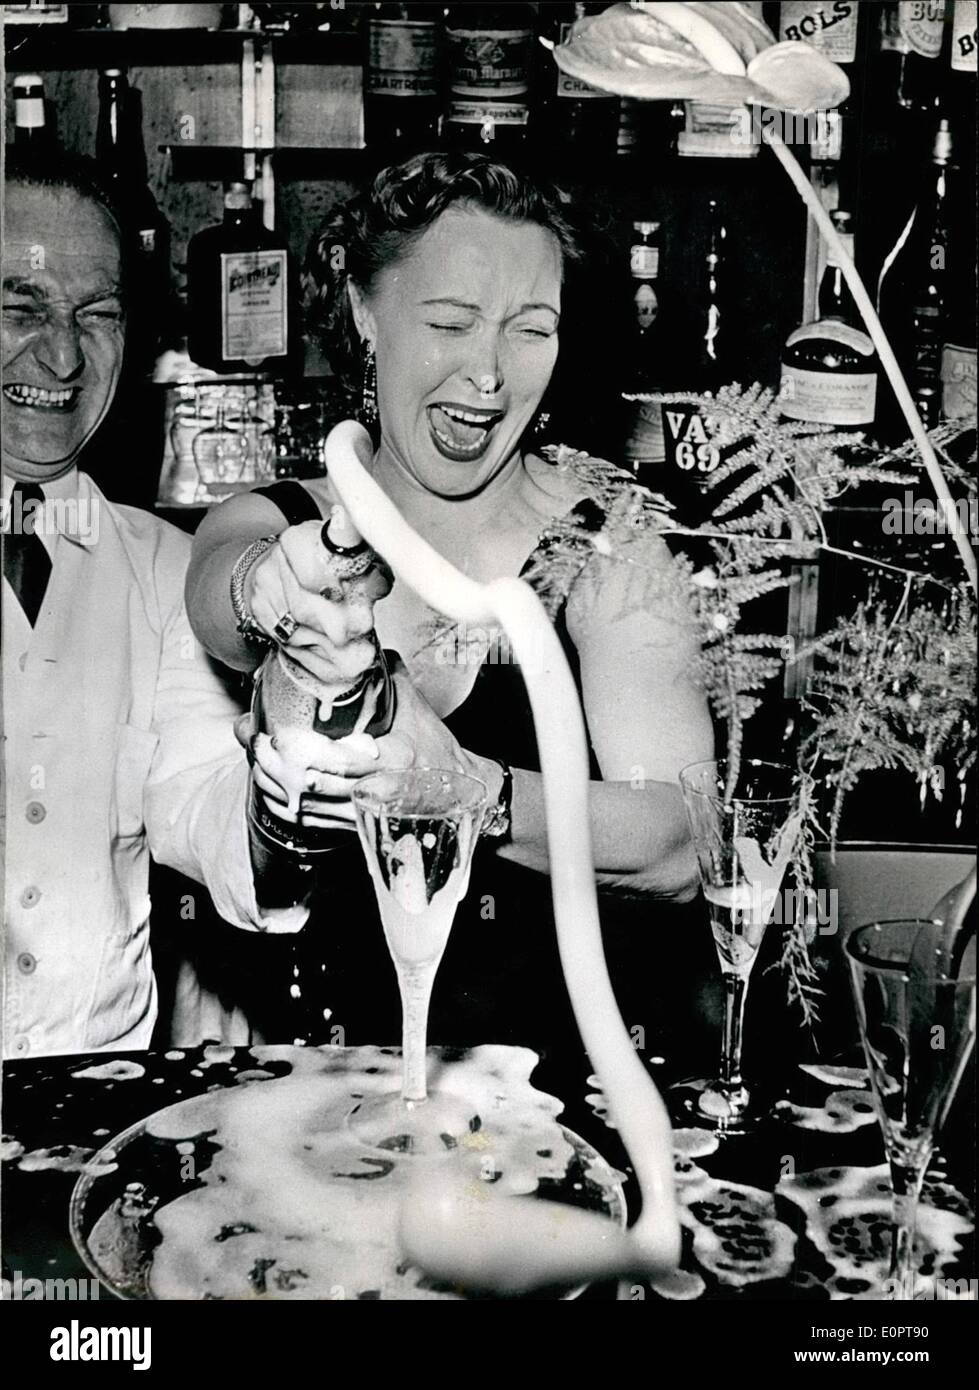 Dec. 12, 1956 - Happy New Year!: The actress Hilde Sessak Hilde Sessak greats the New Year by opening a bottle of champagne. Stock Photo